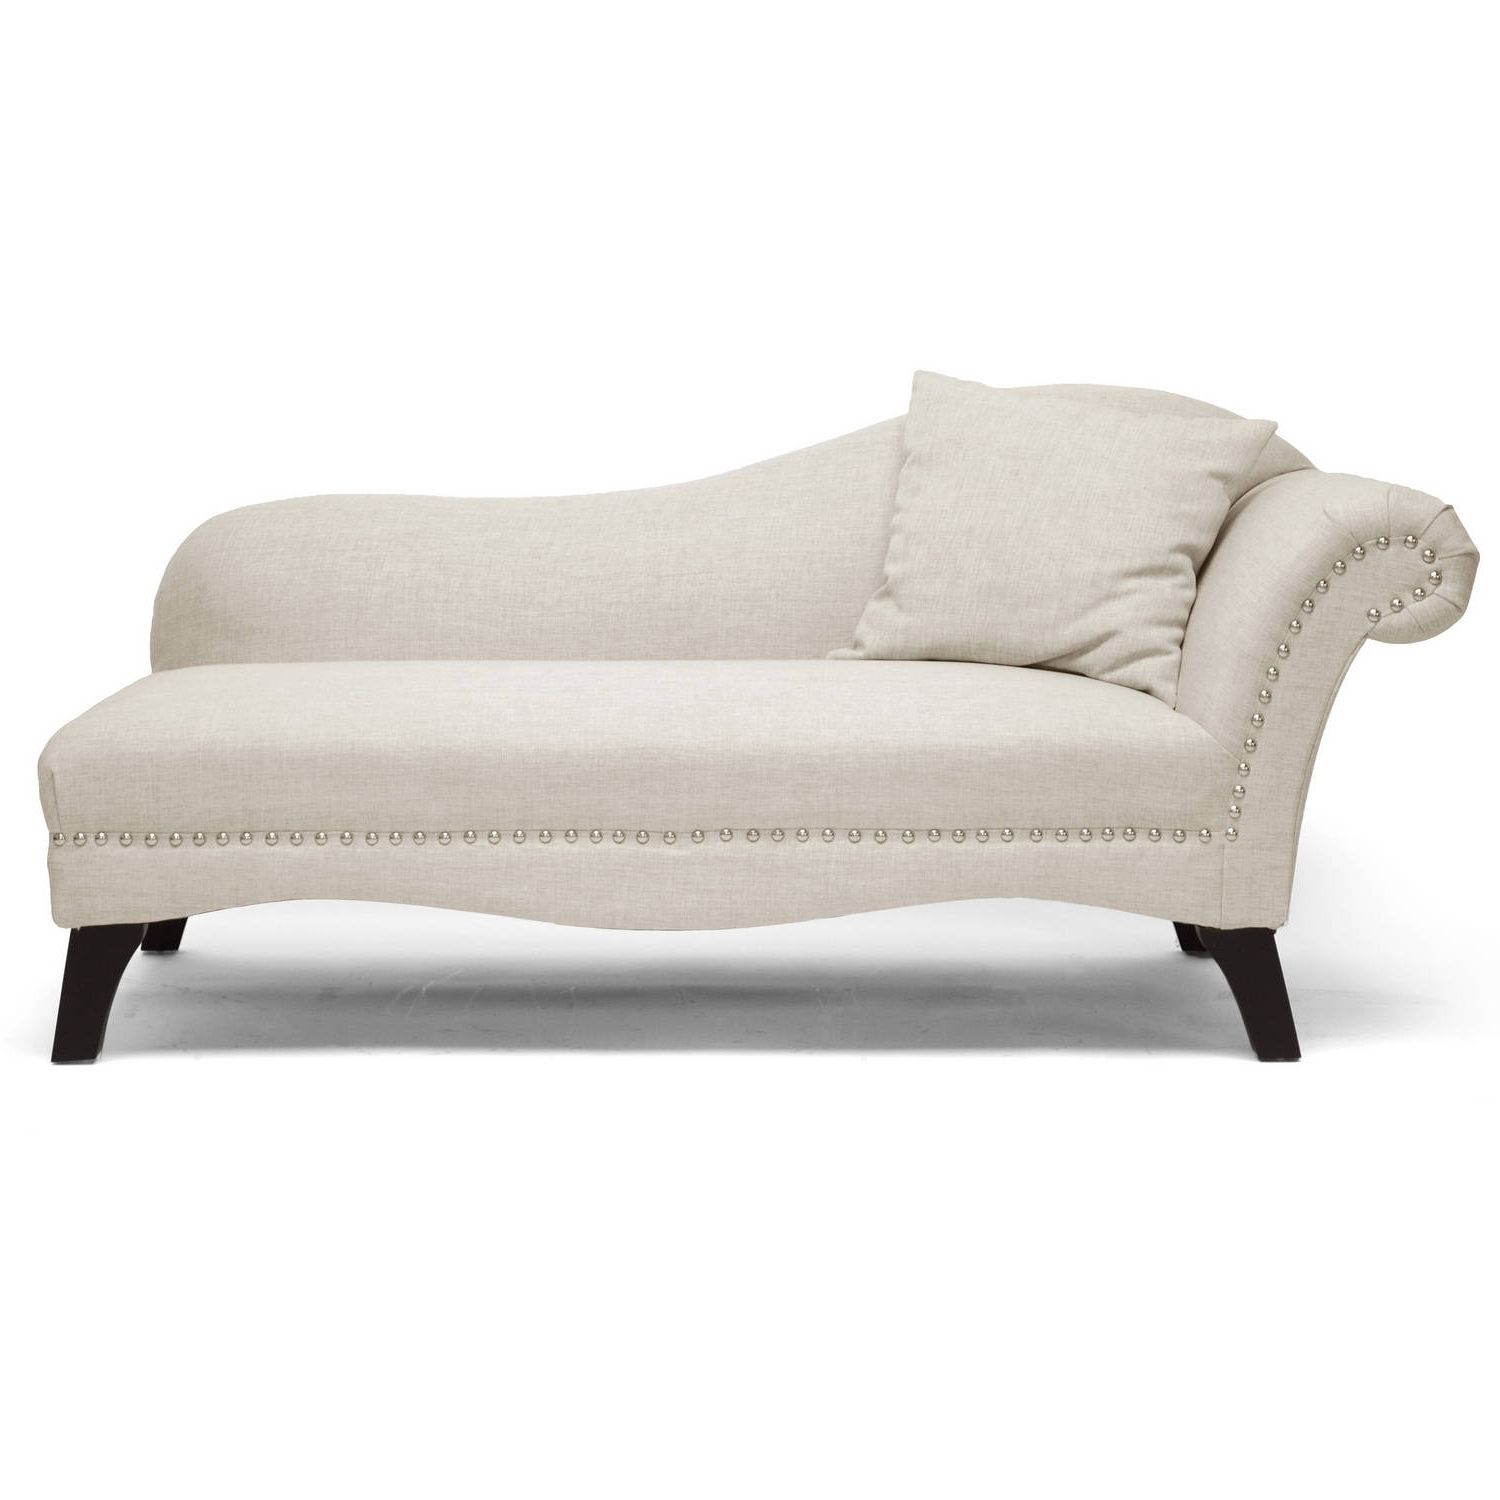 Trendy Chaise Lounges – Walmart Within Bedroom Chaise Lounge Chairs (View 14 of 15)